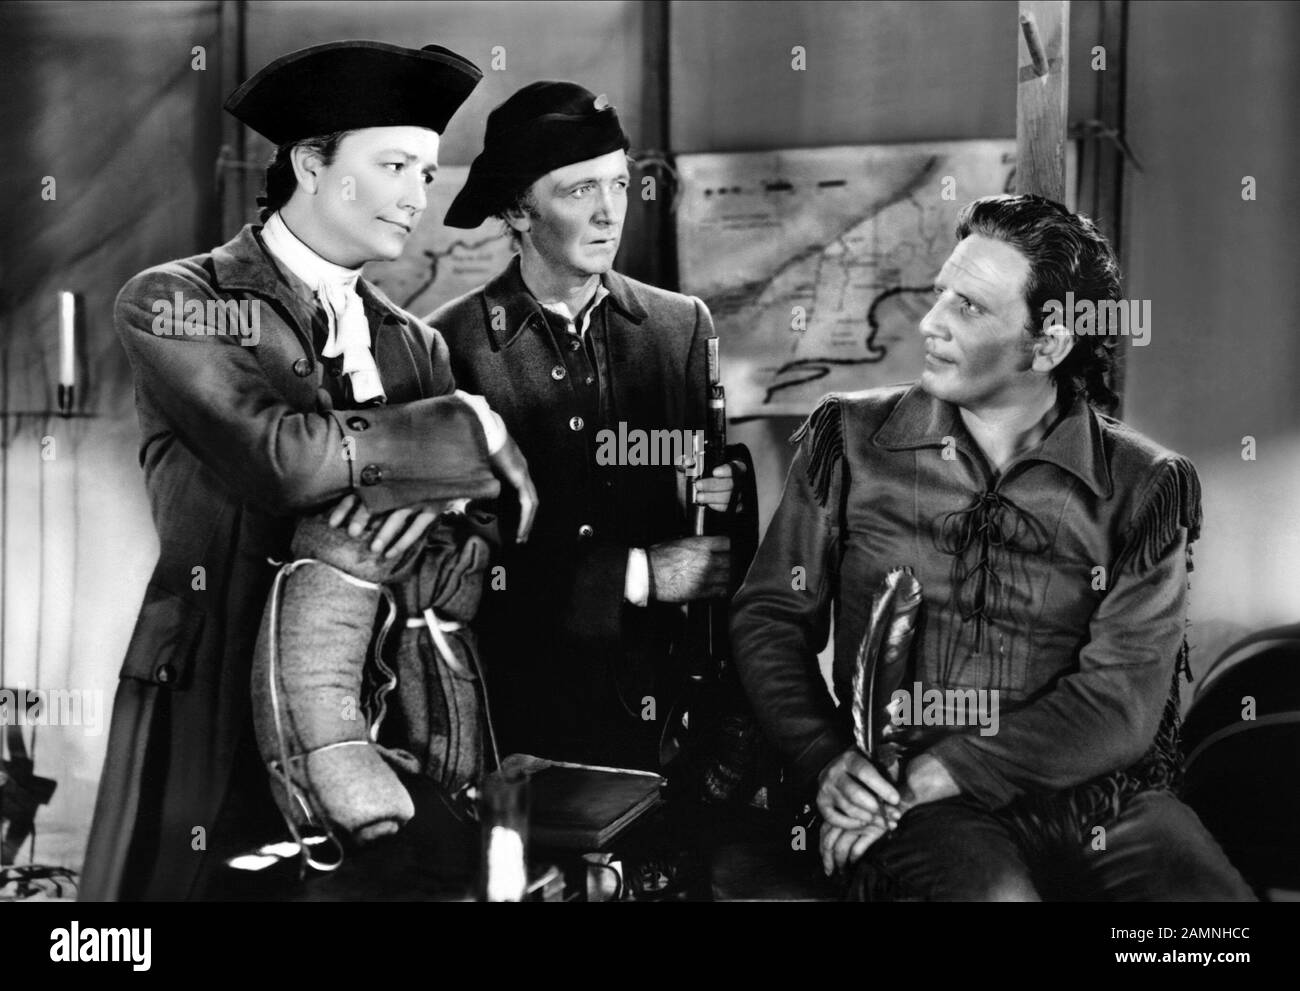 YOUNG, BRENNAN, TRACY, NORTHWEST PASSAGE, 1940 Stockfoto